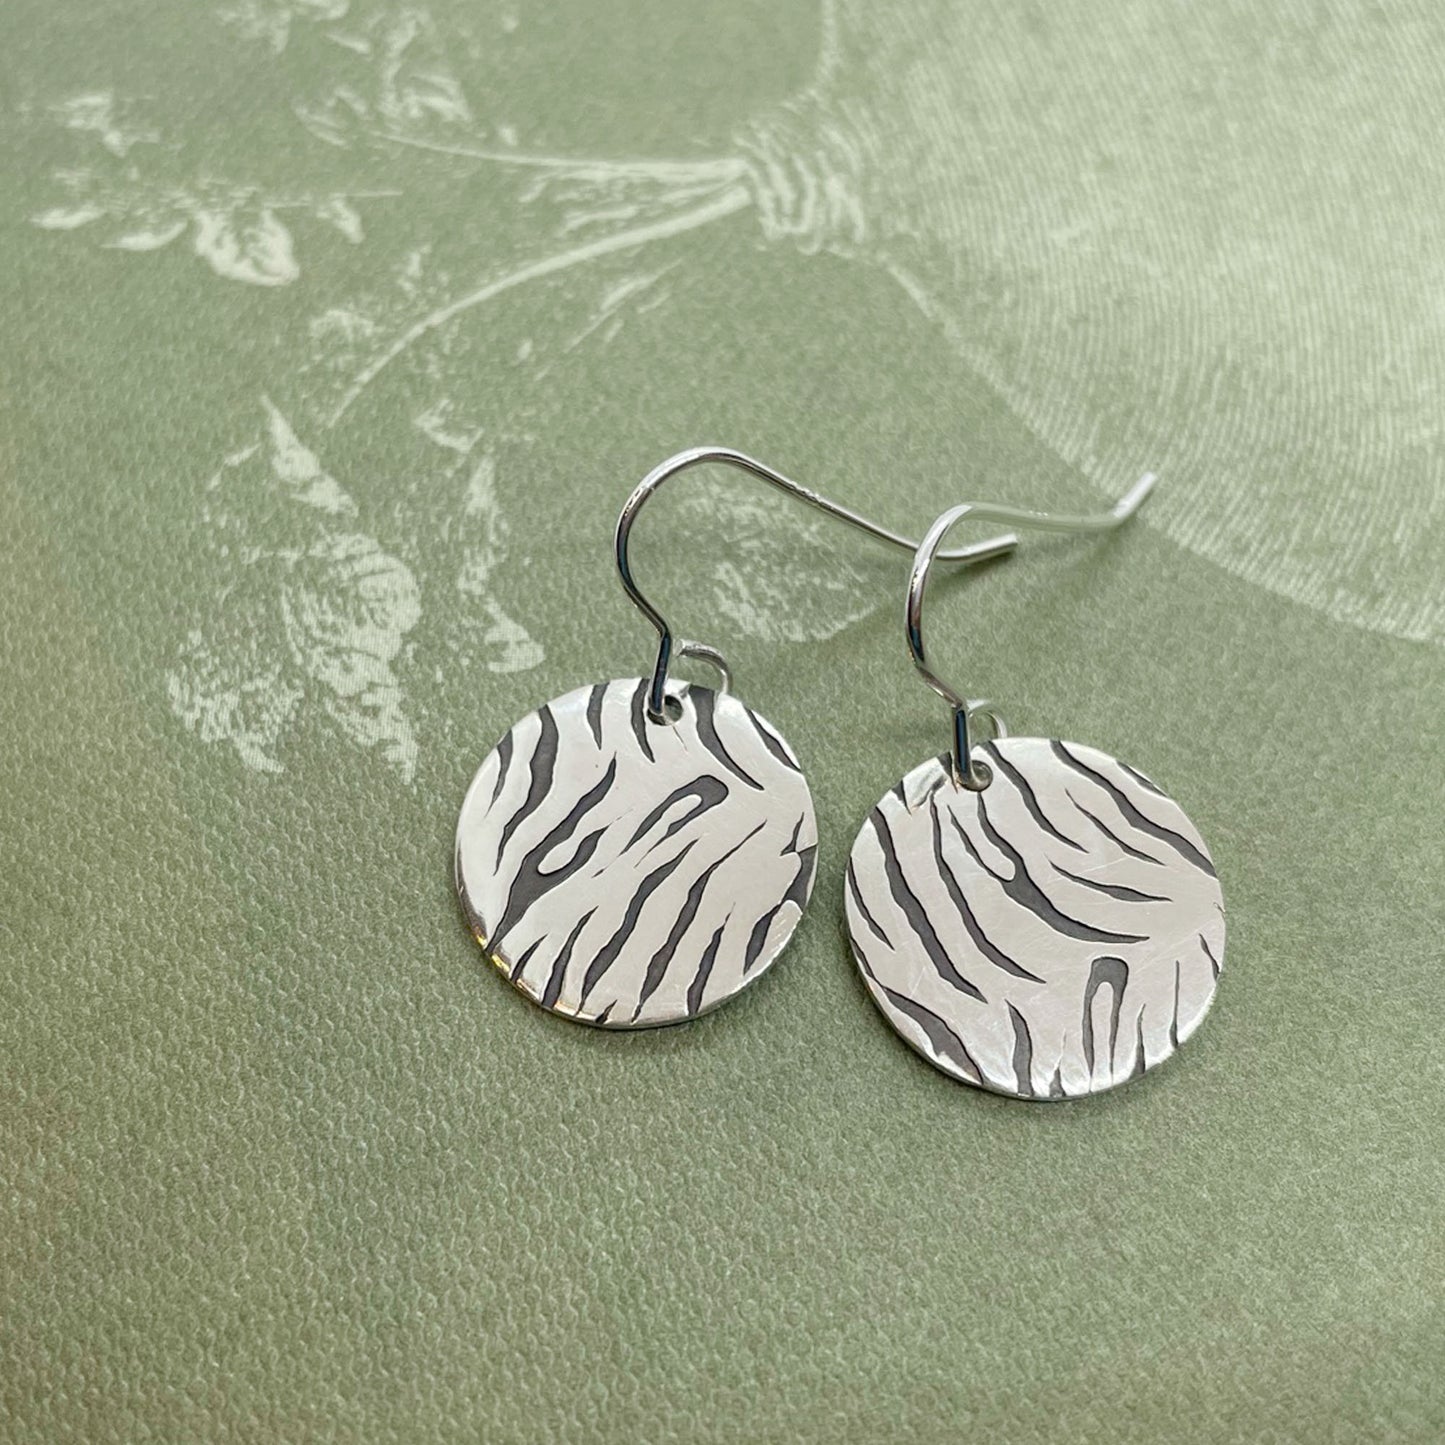 16mm Tiger print, animal print, circle, disc, sterling silver, earrings, statement jewellery